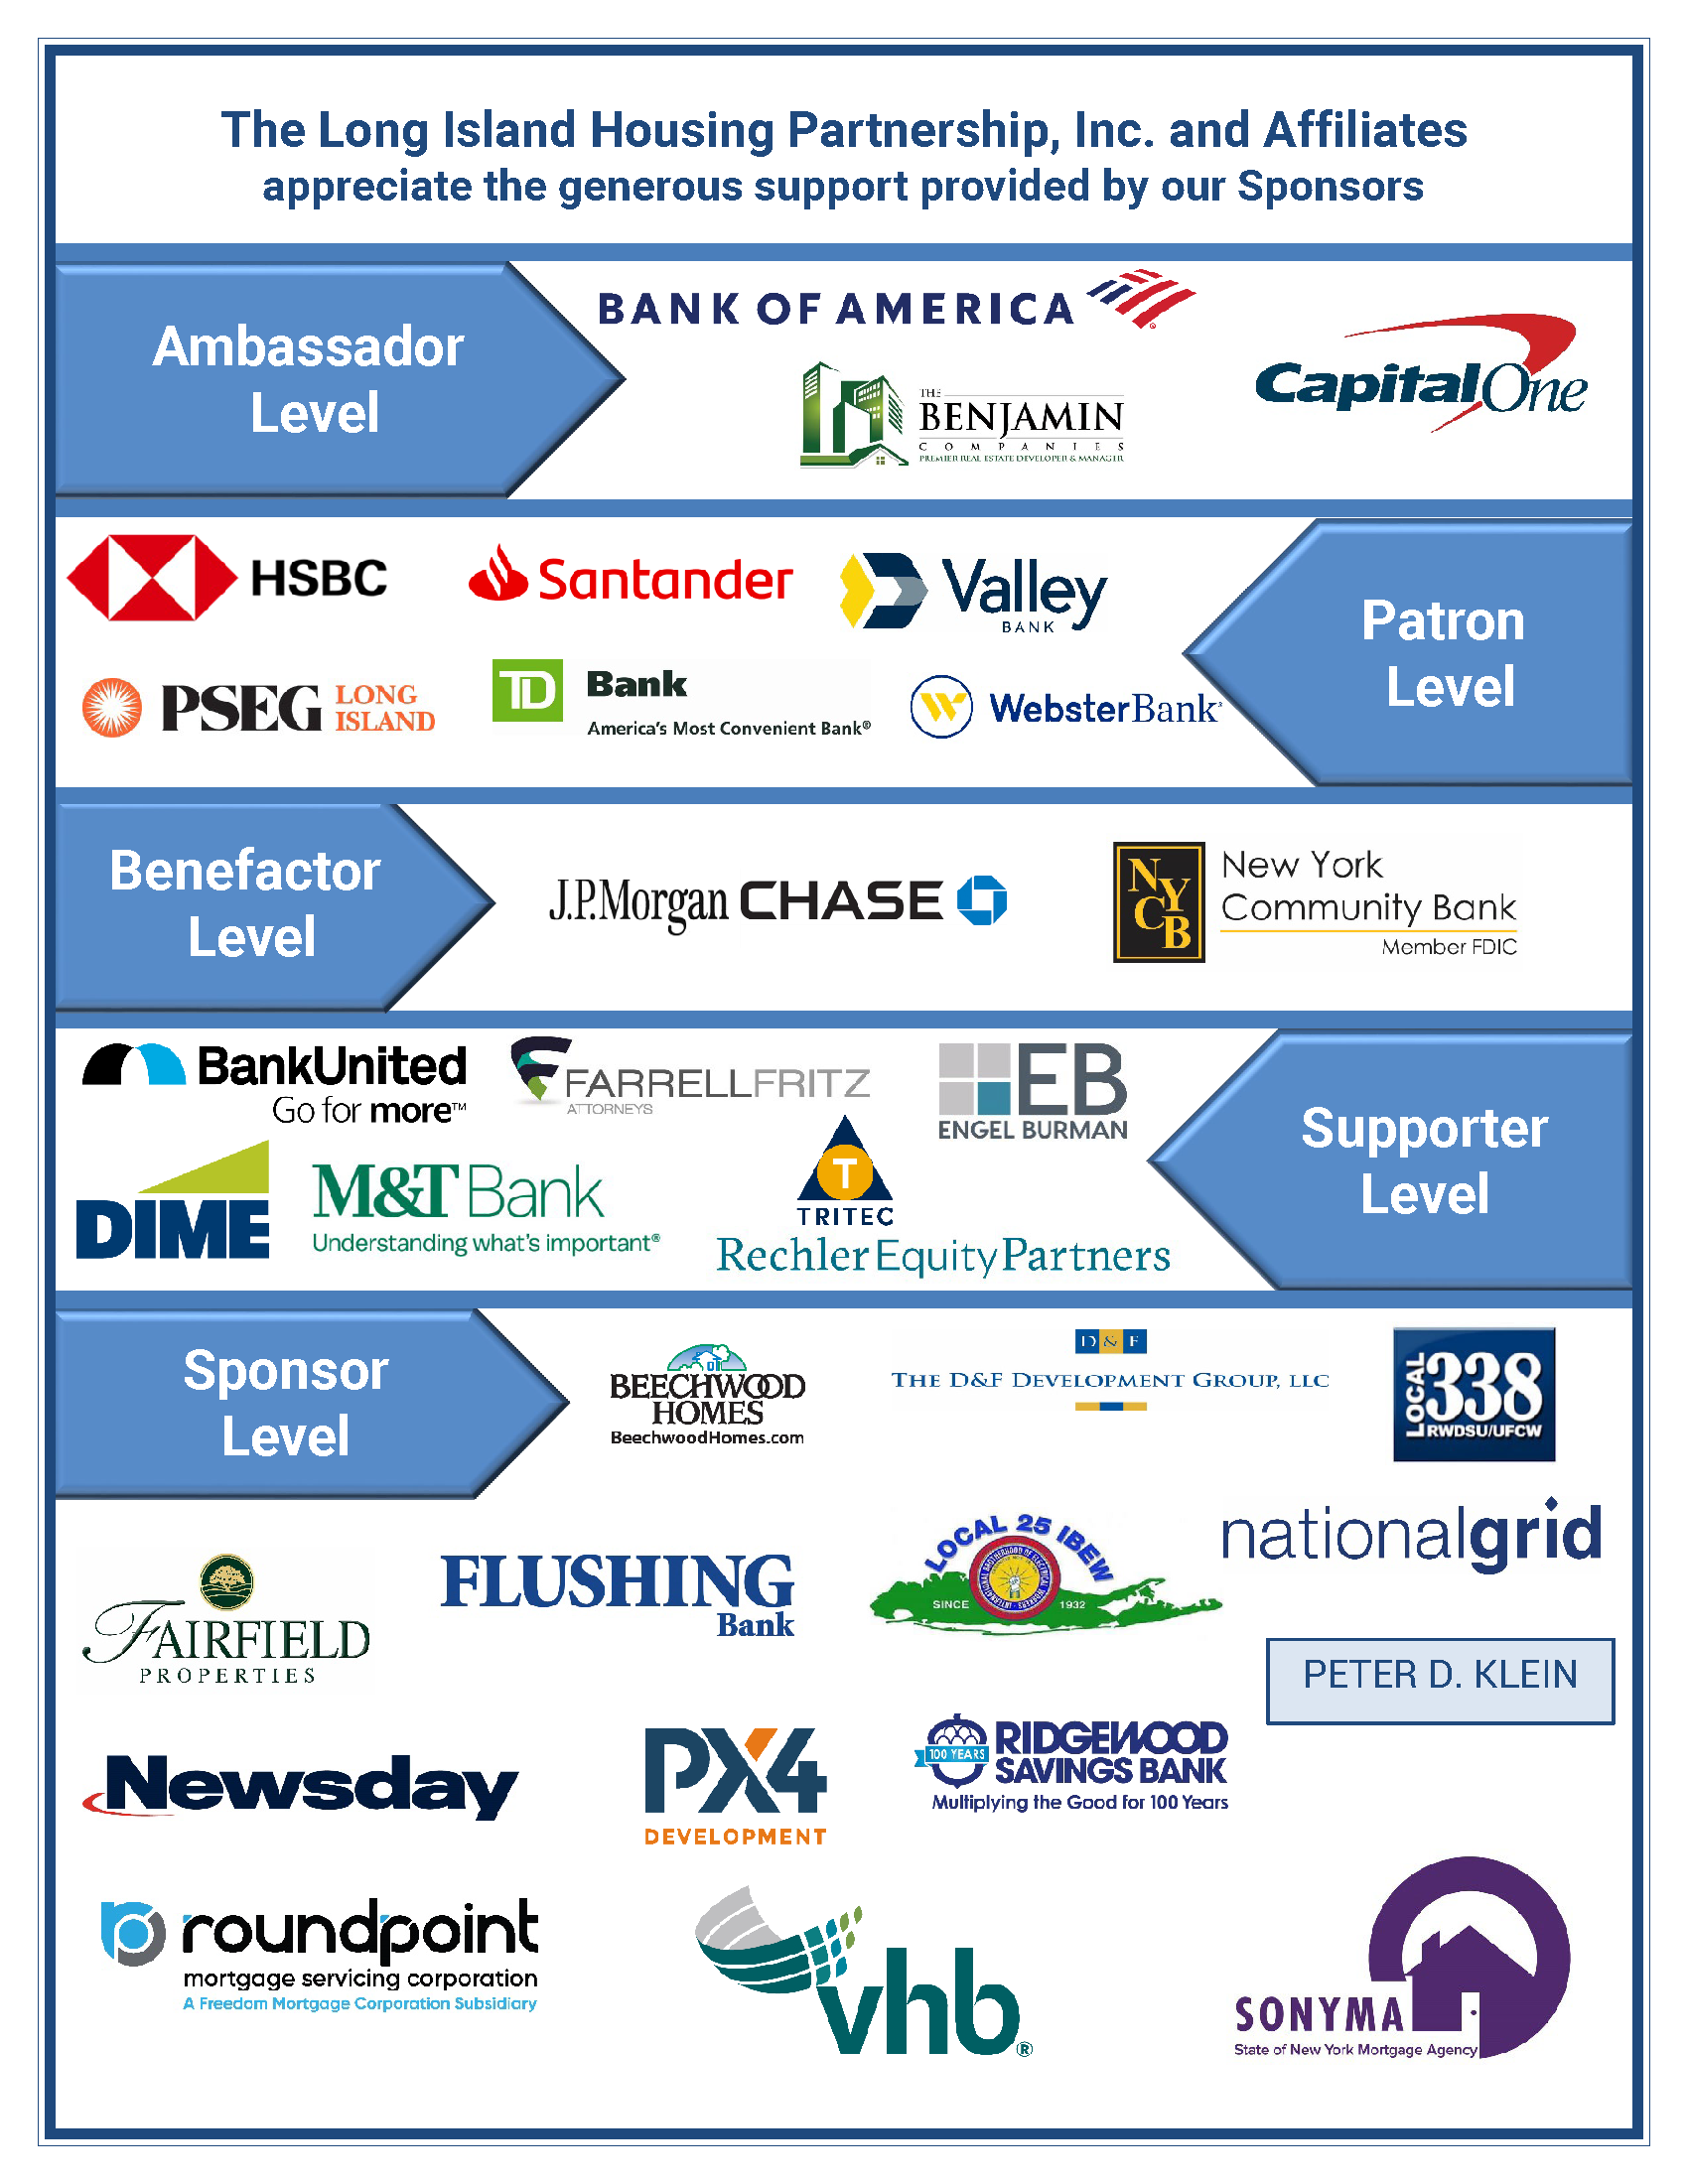 LIHP Page of Sponsors - Thank you